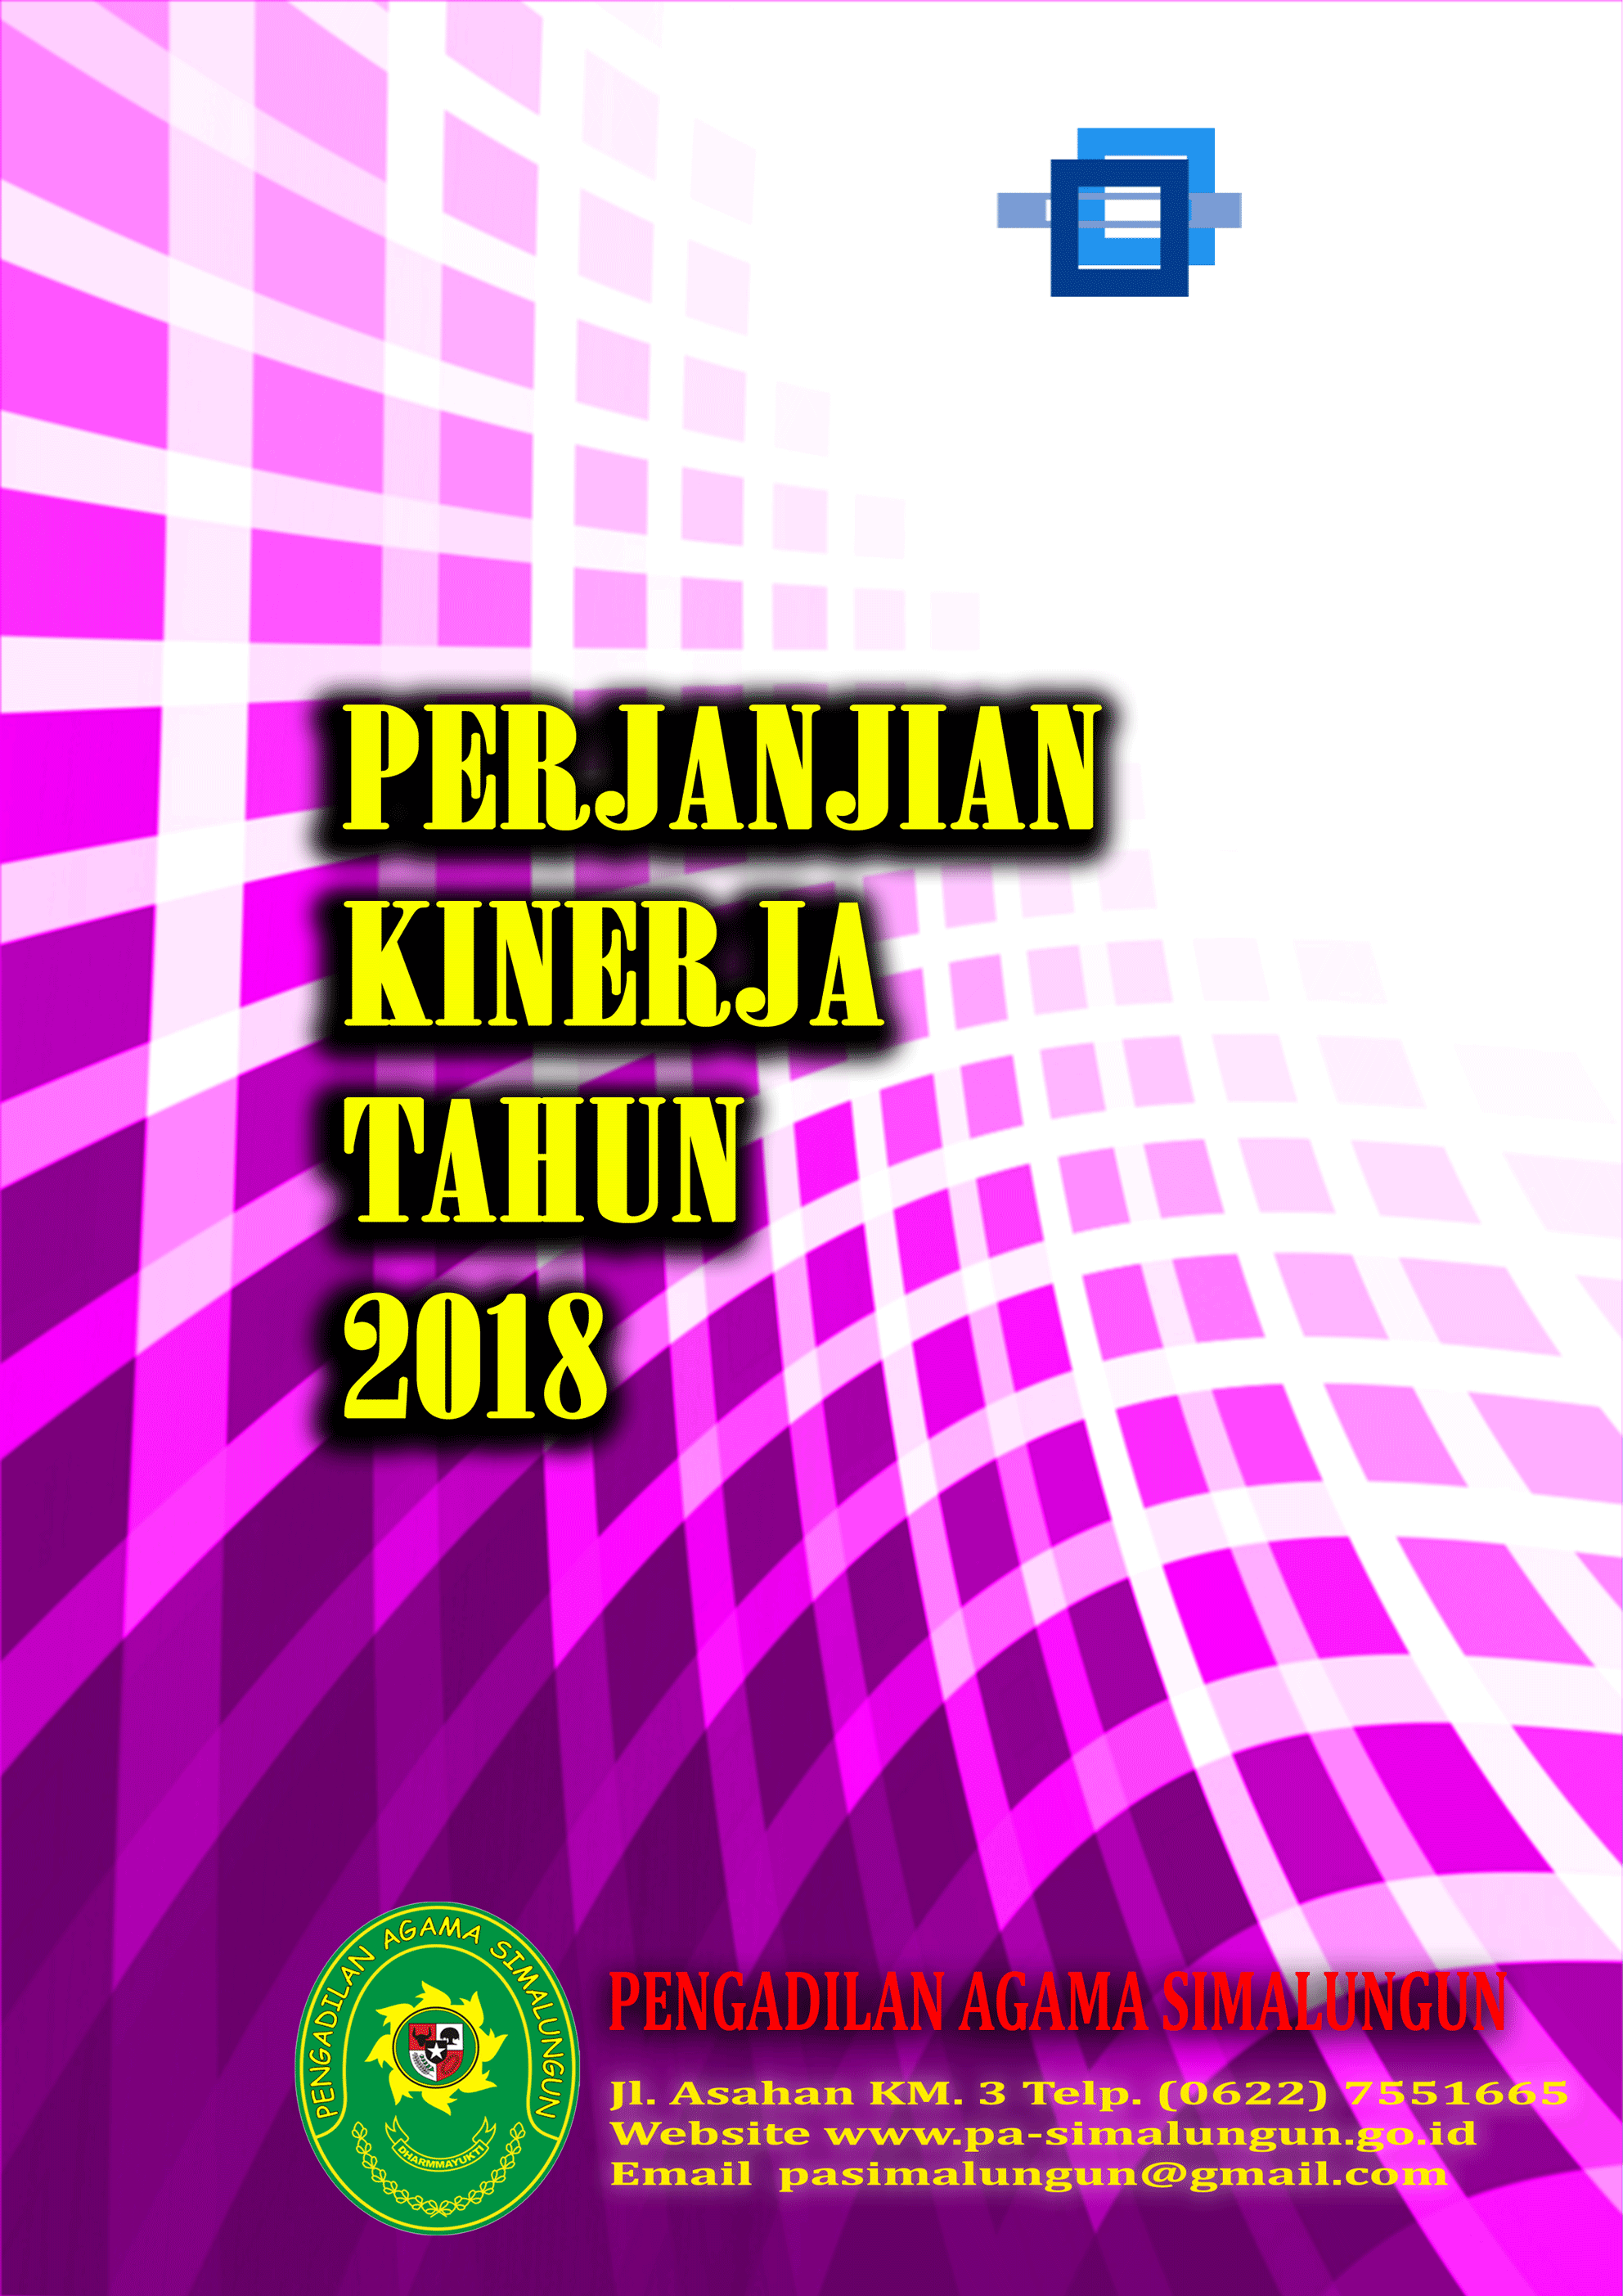 COVER PK 2018